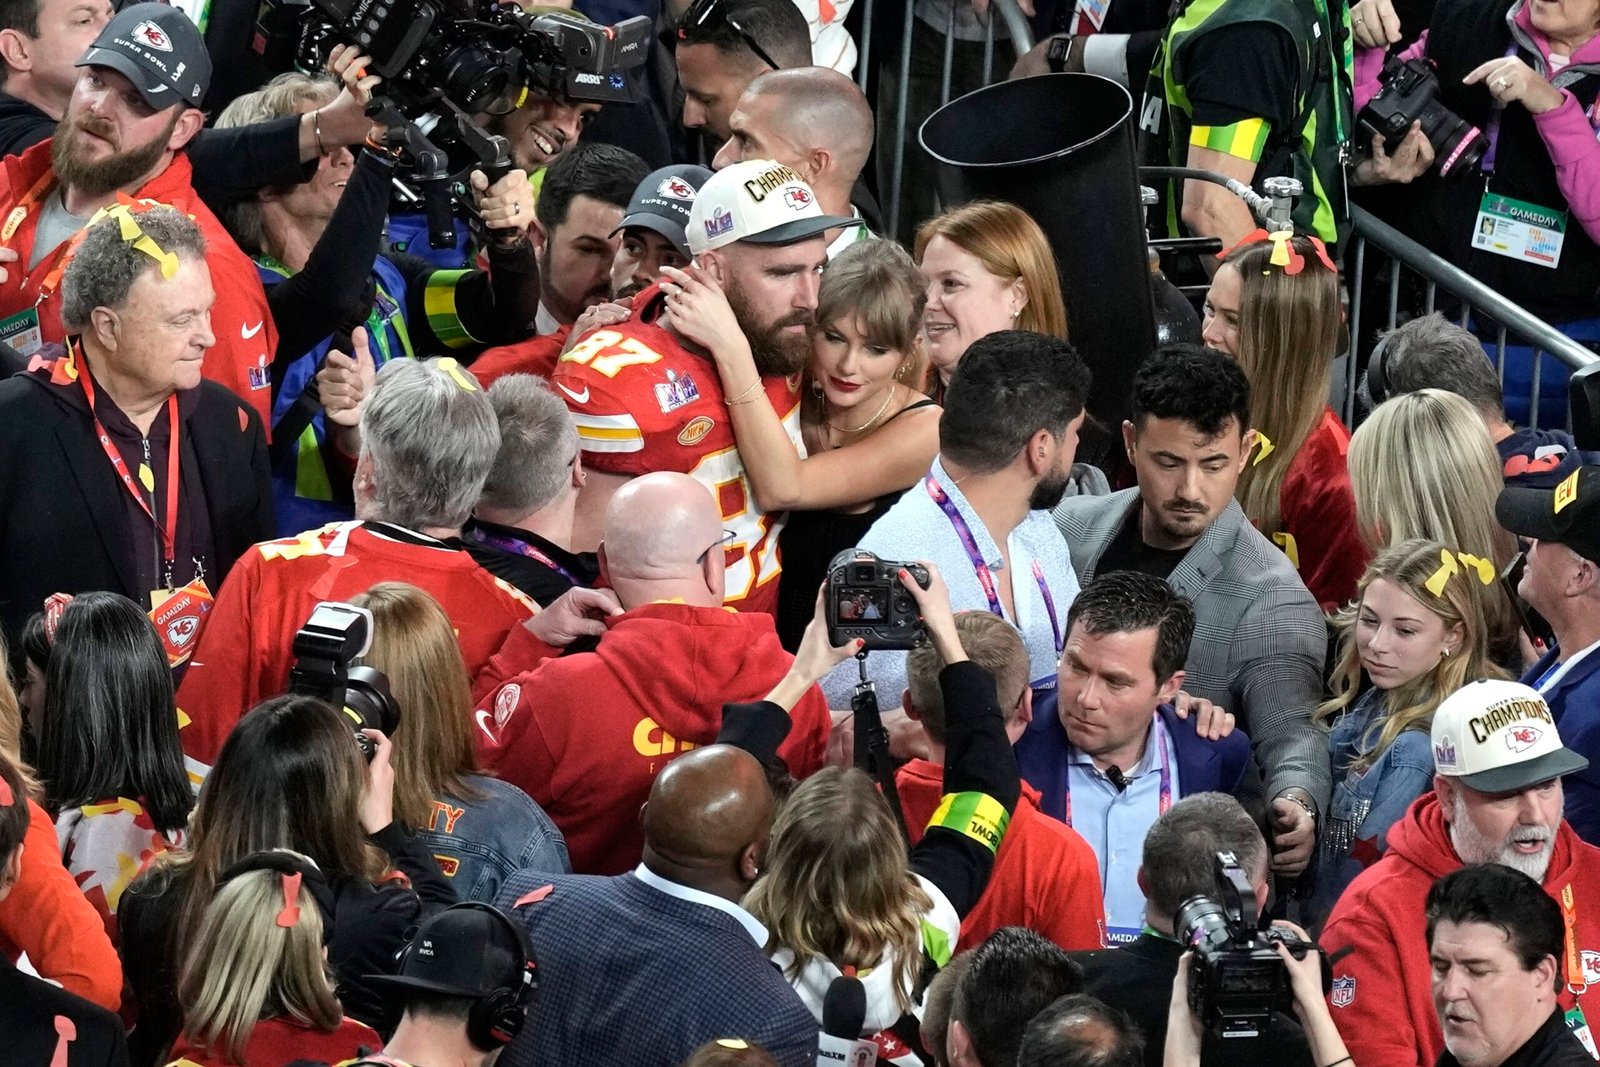 Chiefs fans hoping to see Taylor Swift at victory parade